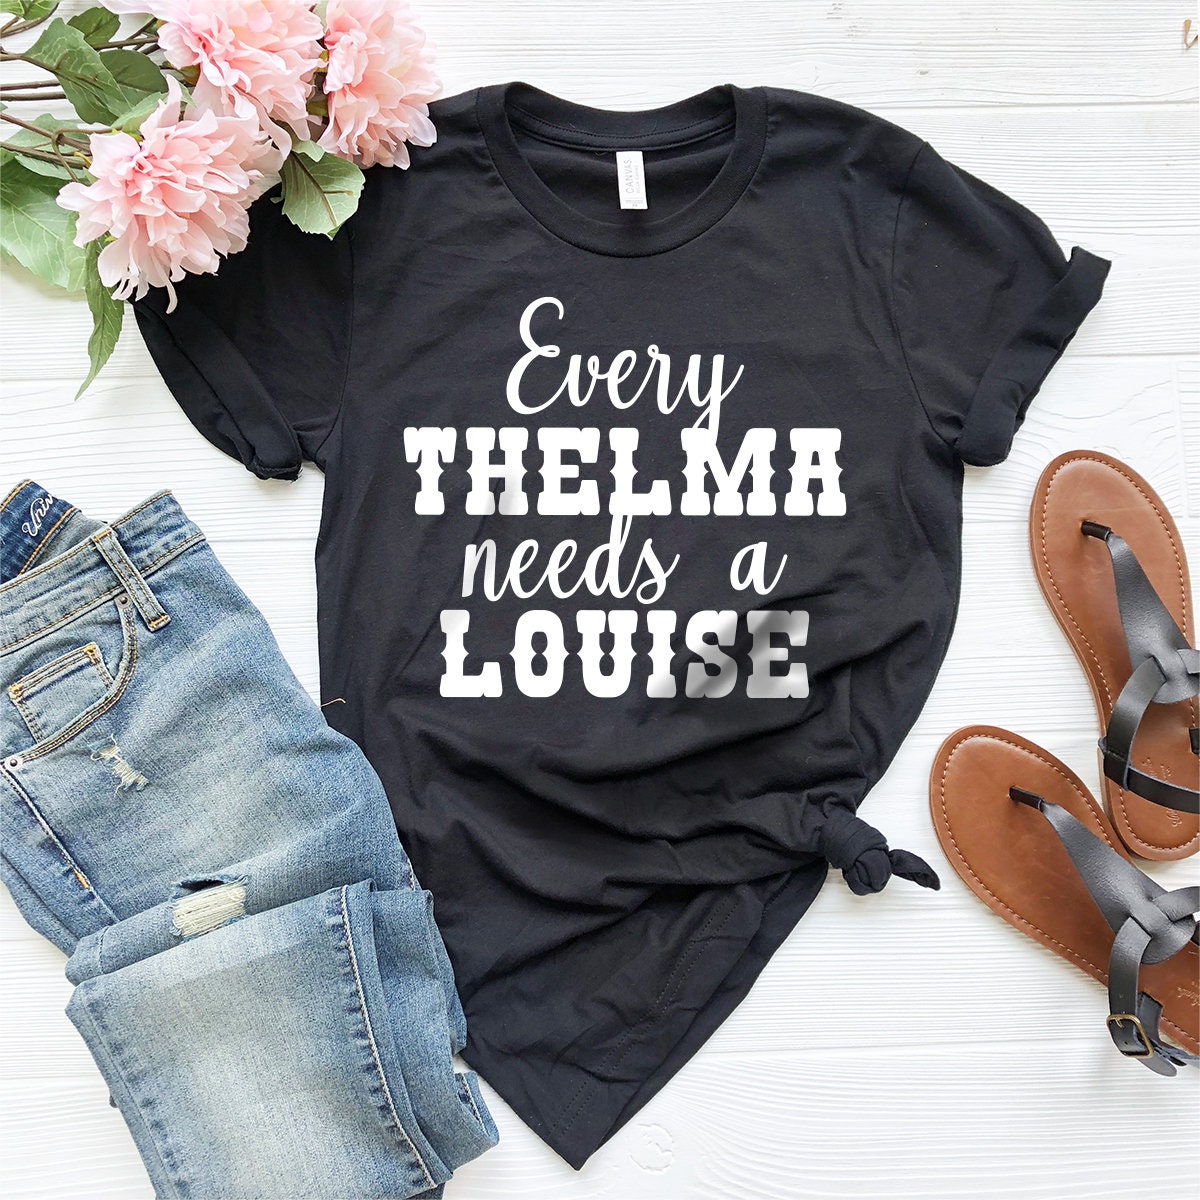 Thelma and Louise, Best Friends Shirt, Every Thelma Needs a Louise TShirt,  Ride or Die, Matching Shirts, Best Friend Gift, Bestie Gift, Gift for